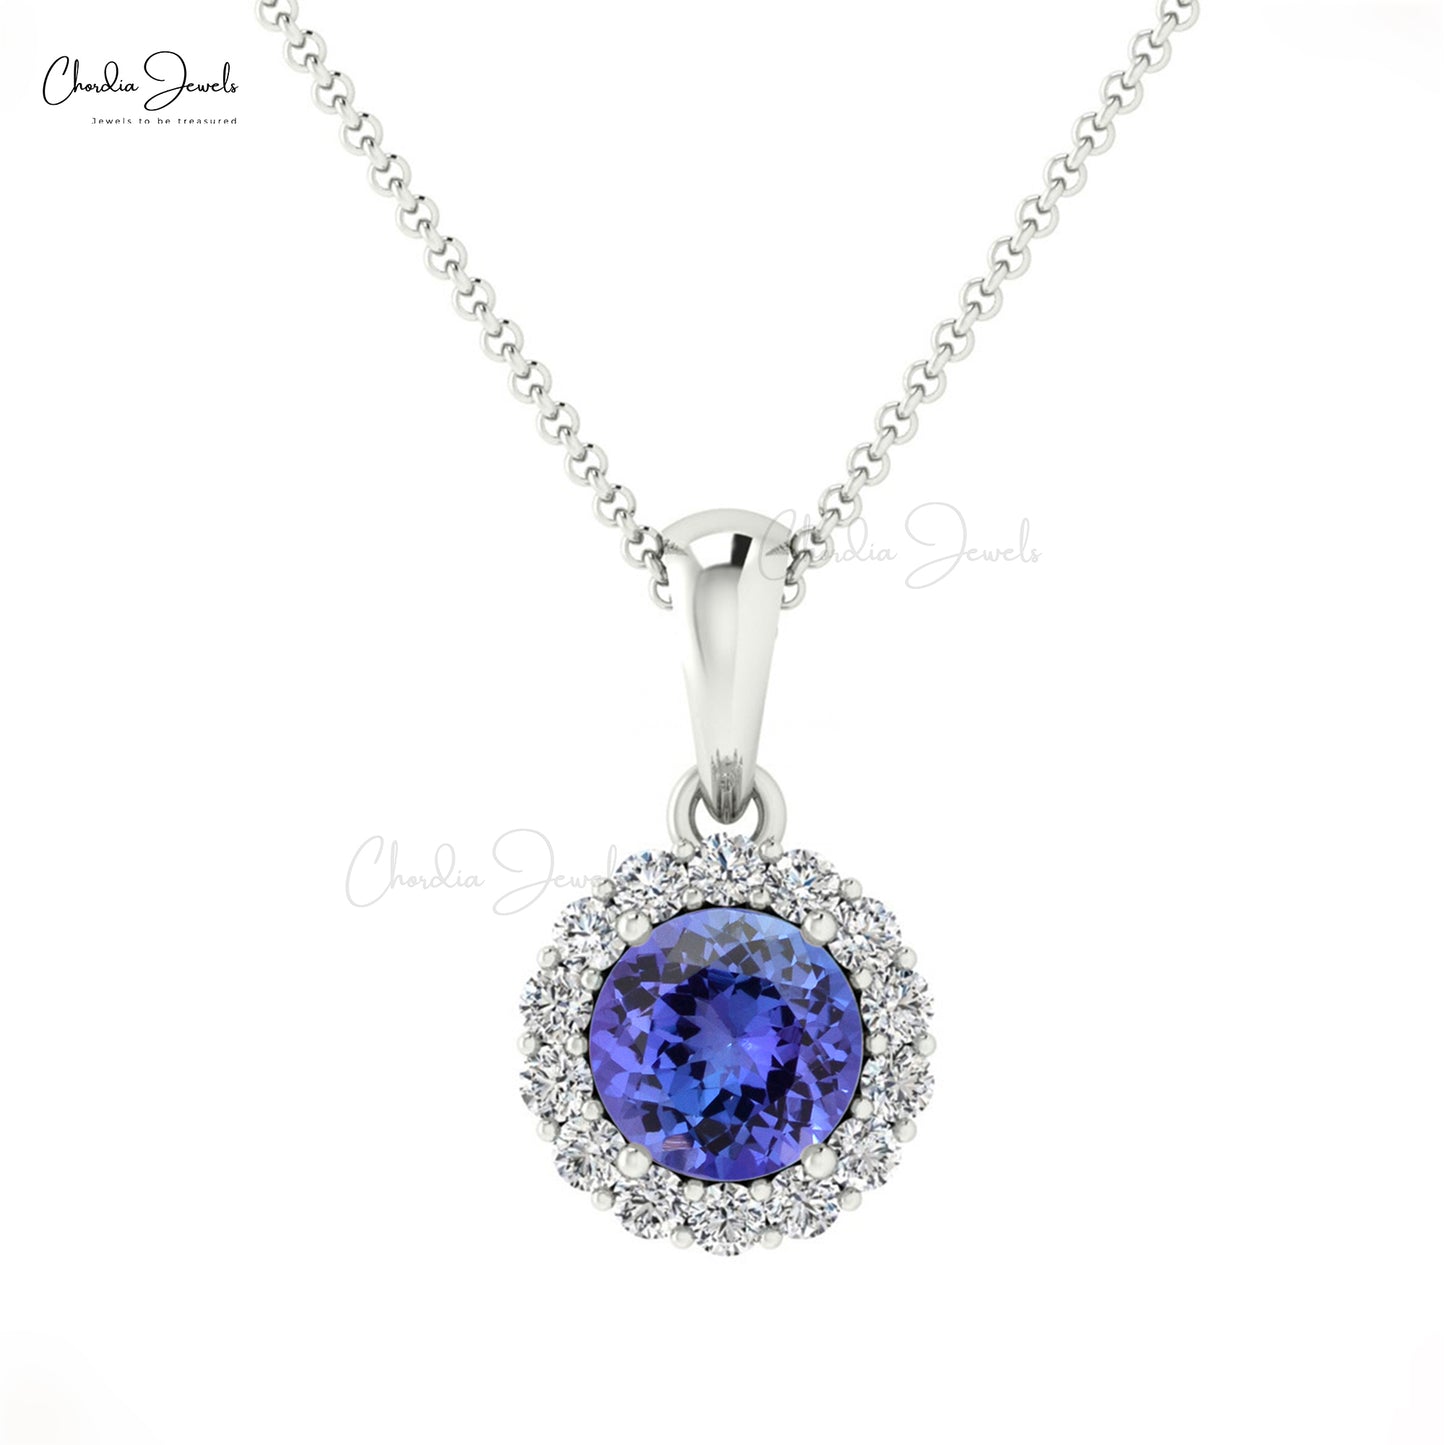 New Promotion Hot Style Diamond Halo Pendant Necklace Natural Blue Tanzanite Gemstone Solitaire Pendant Real 14k Gold Jewelry For Gift